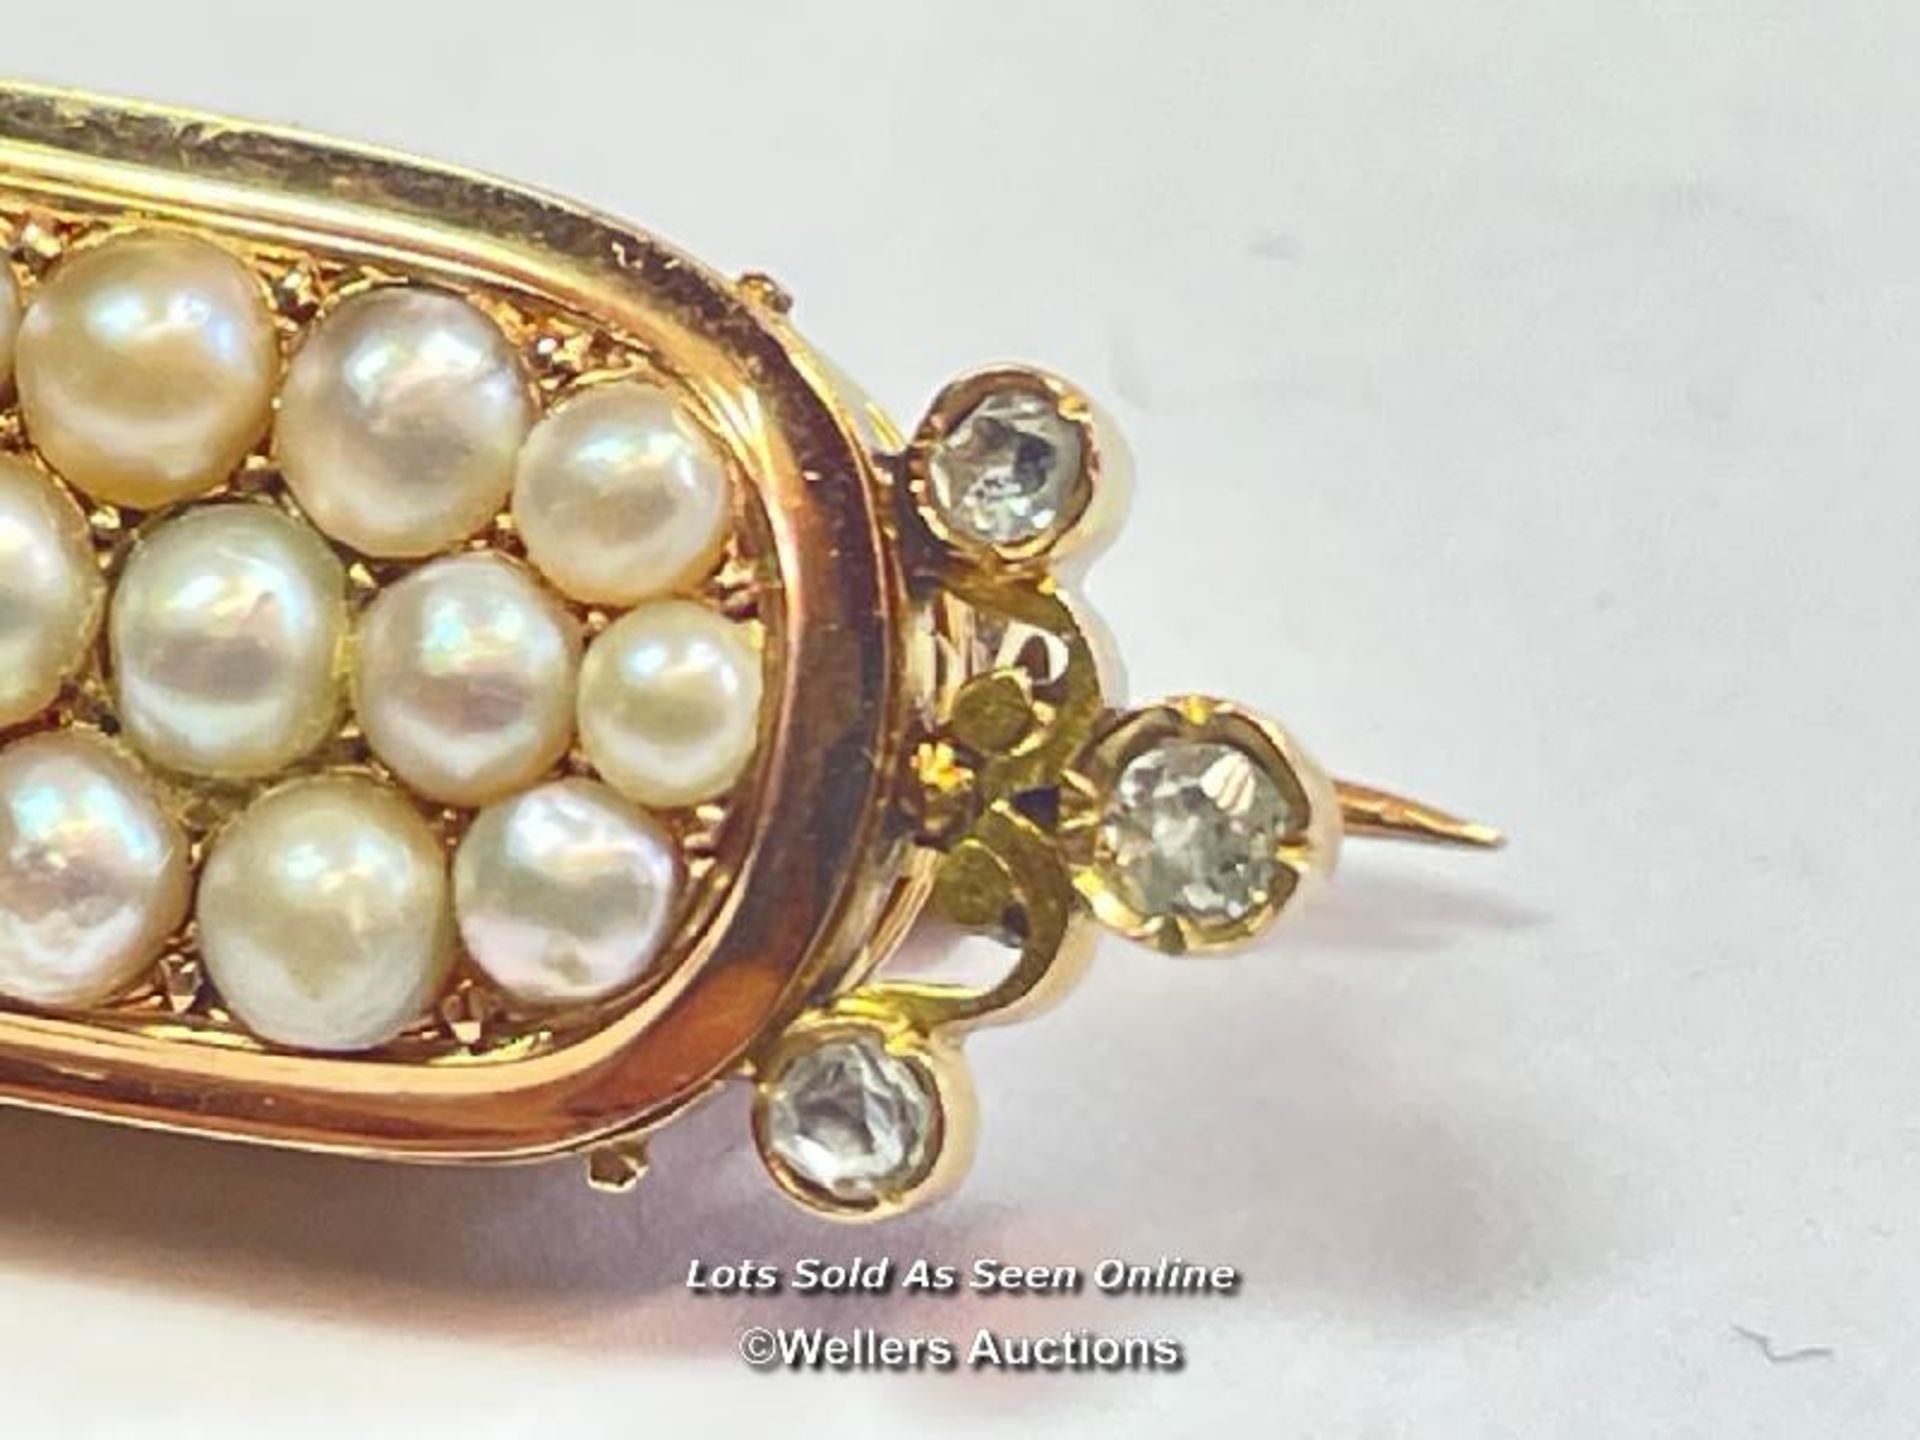 STOCK PIN / BROOCH IN YELLOW METAL WITH THREE ROWS OF SPLIT PEARLS AND ROSE CUT DIAMOND - Image 4 of 5